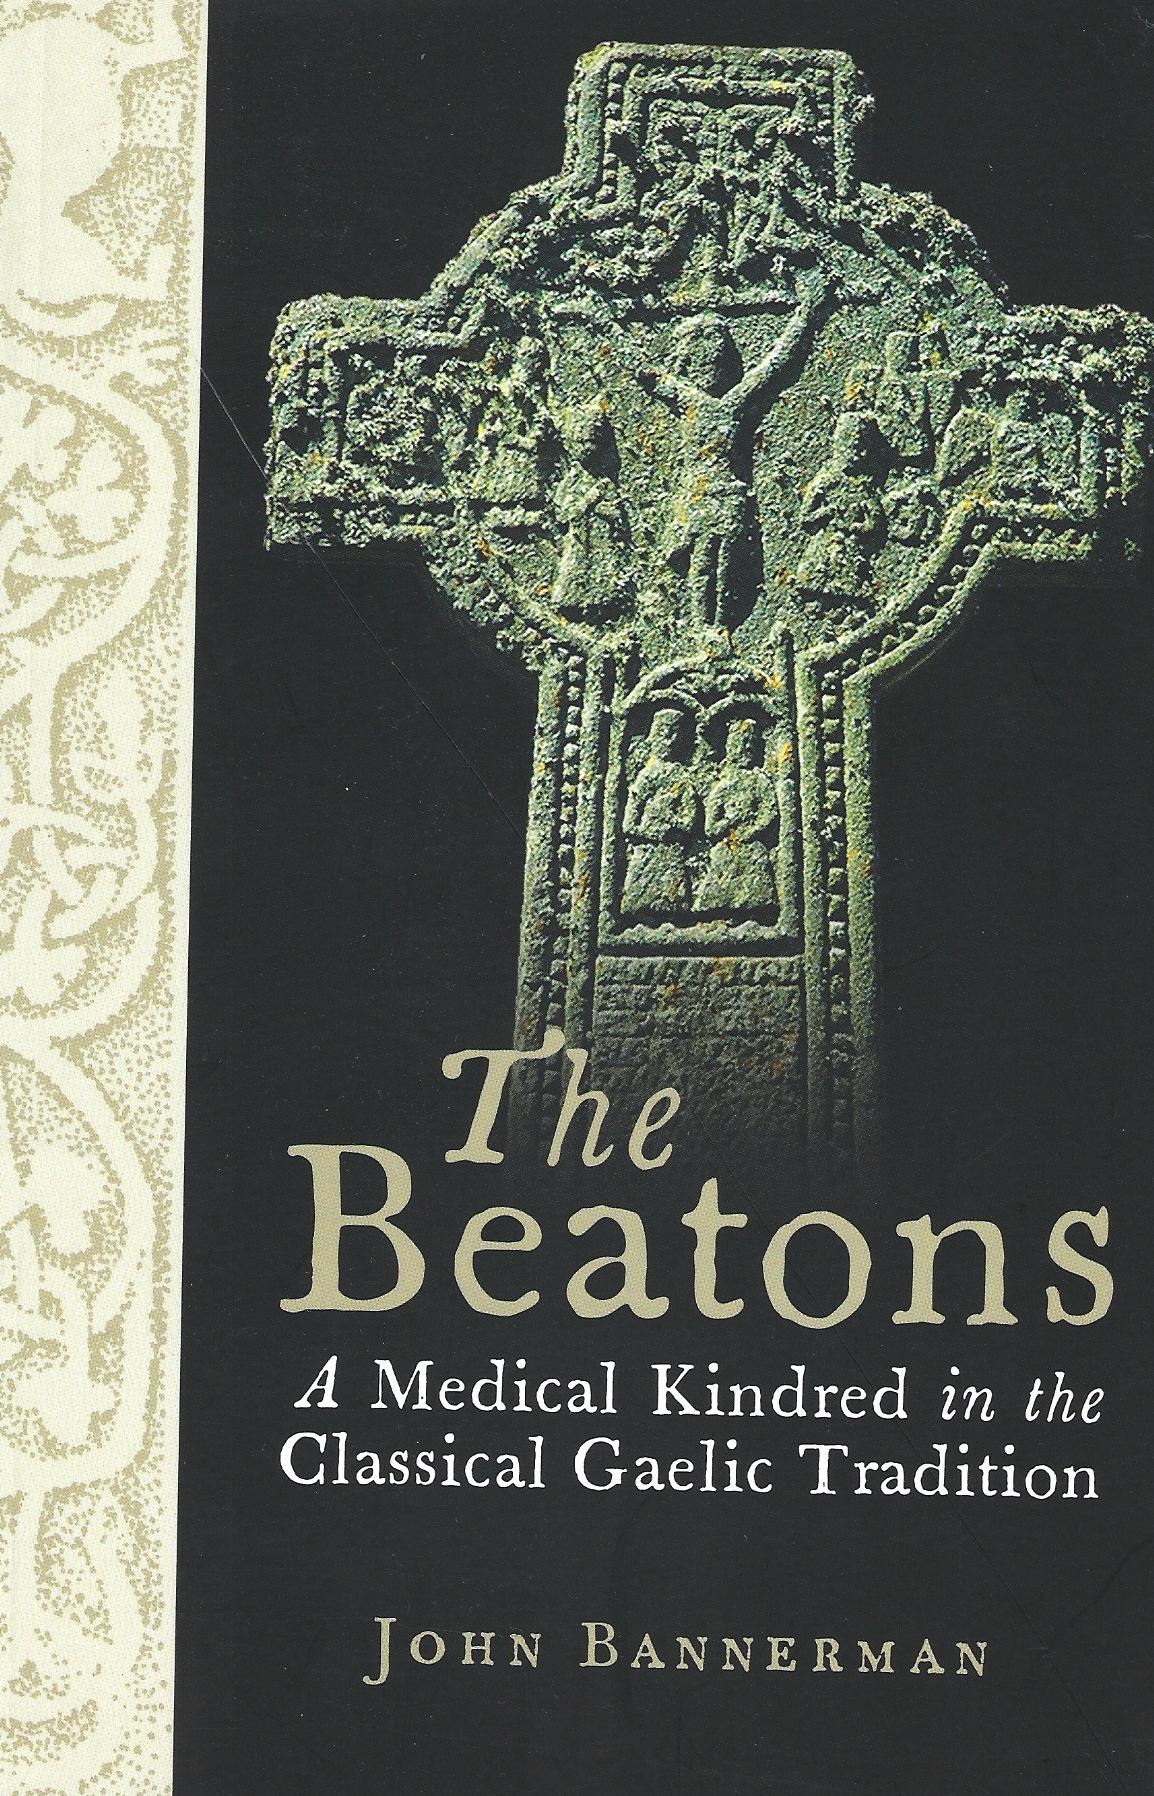 Image for The Beatons: A Medical Kindred in the Classical Gaelic Tradition.